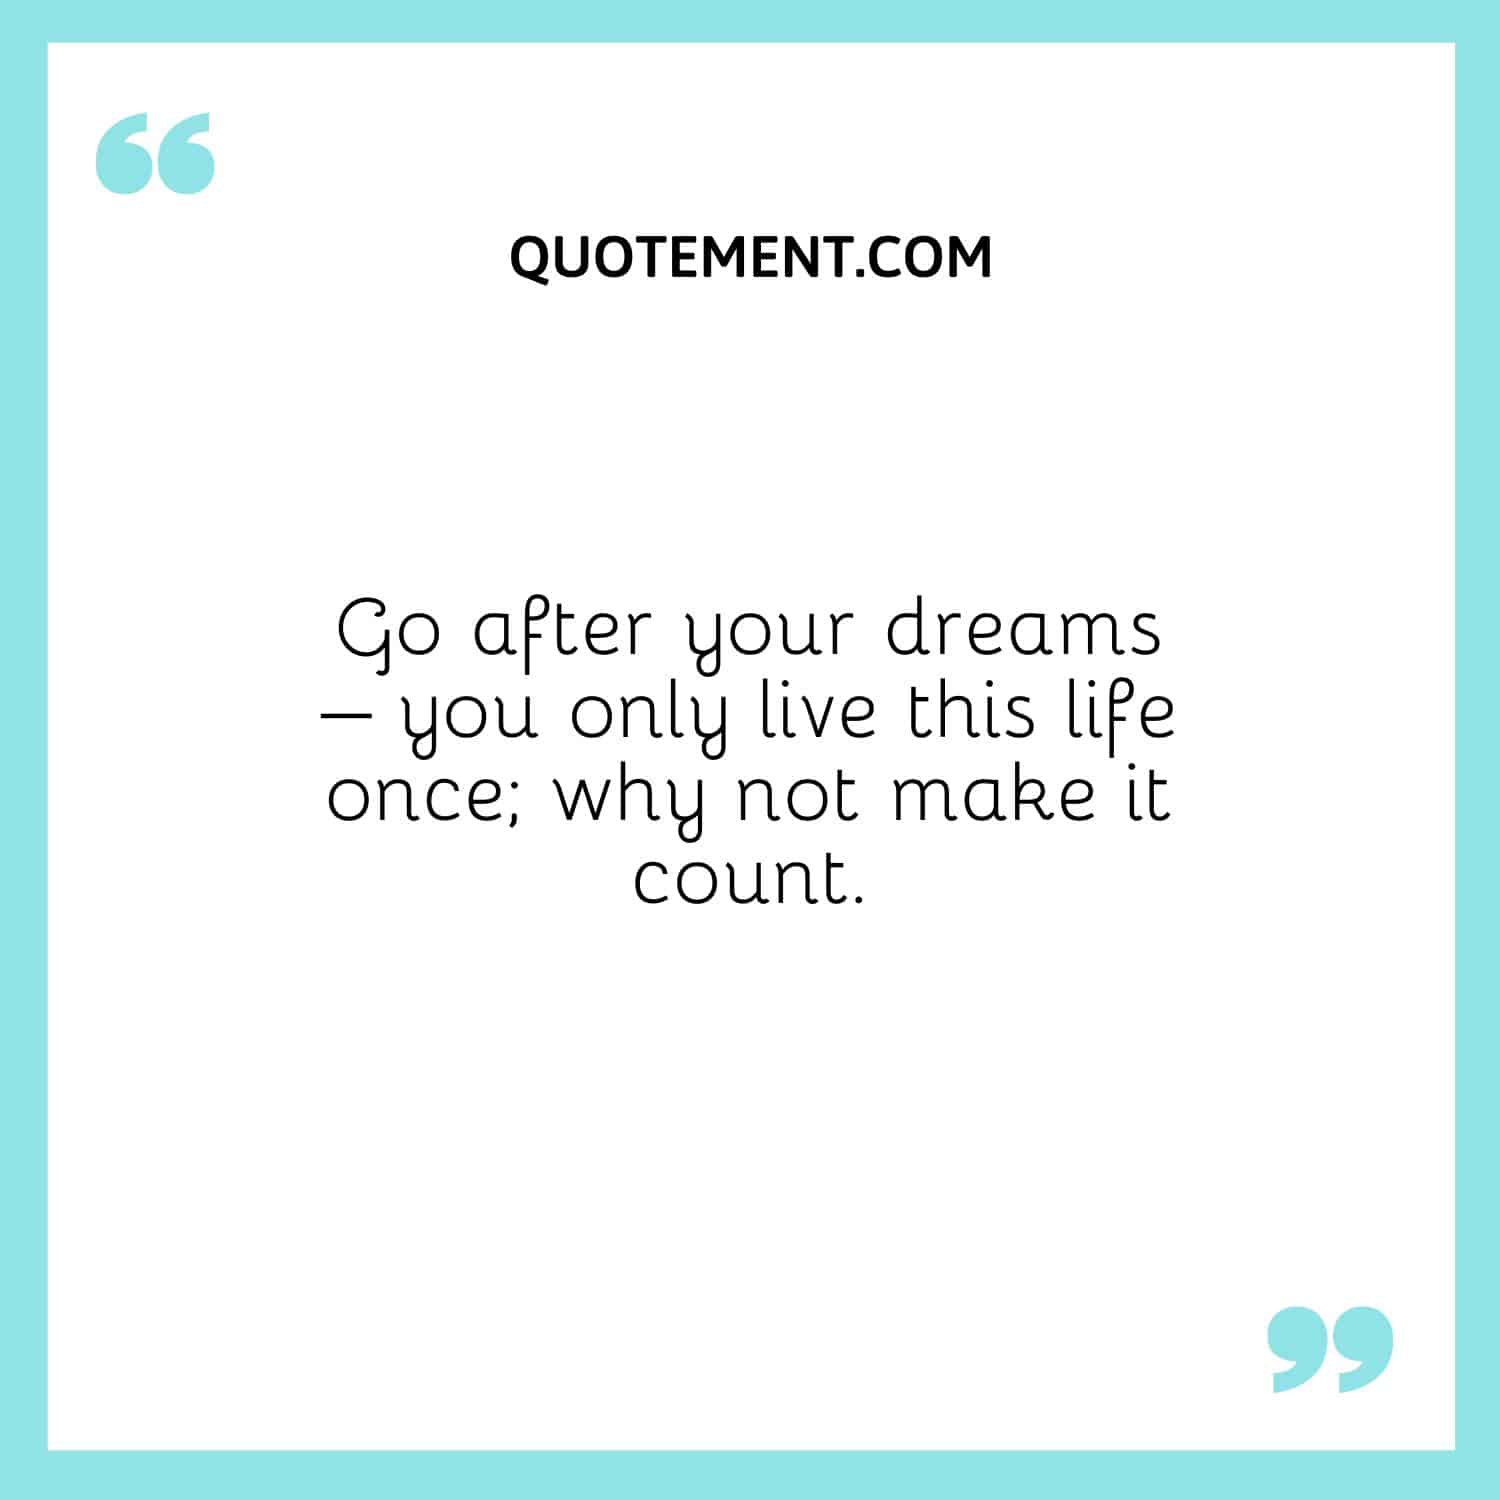 Go after your dreams – you only live this life once; why not make it count.